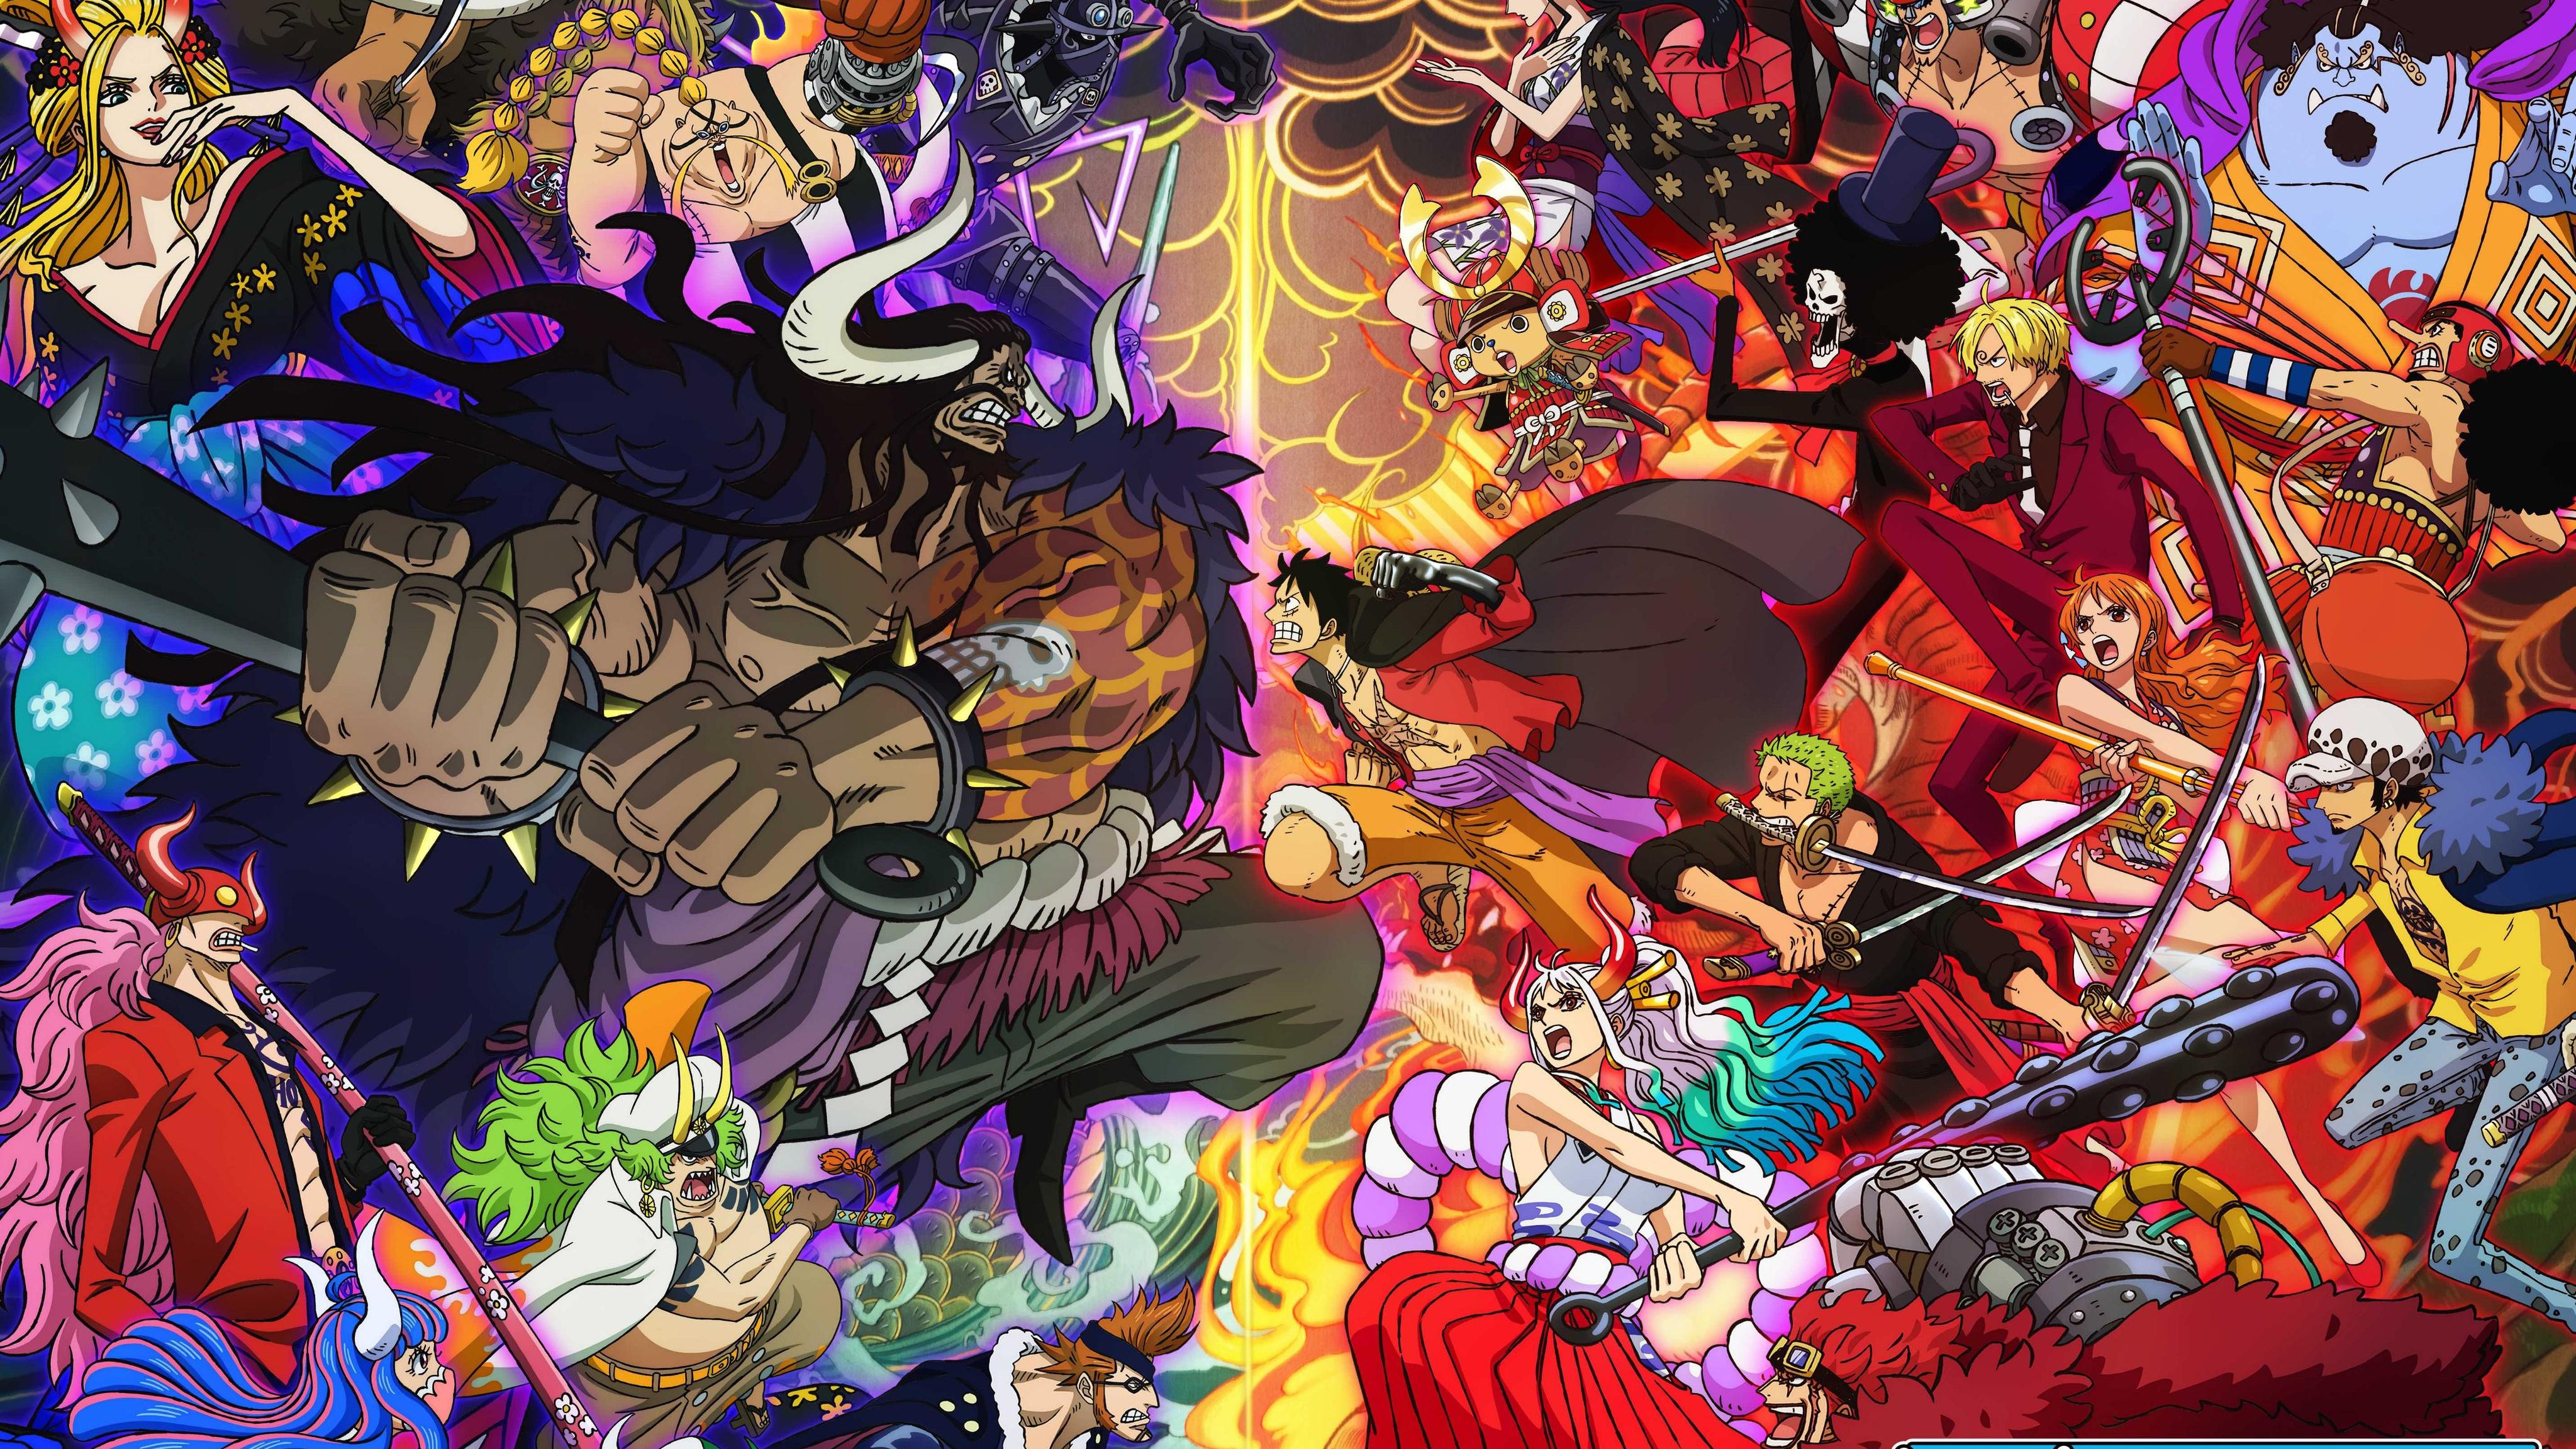 Crunchyroll Adds More One Piece Anime Episodes to Europe - News